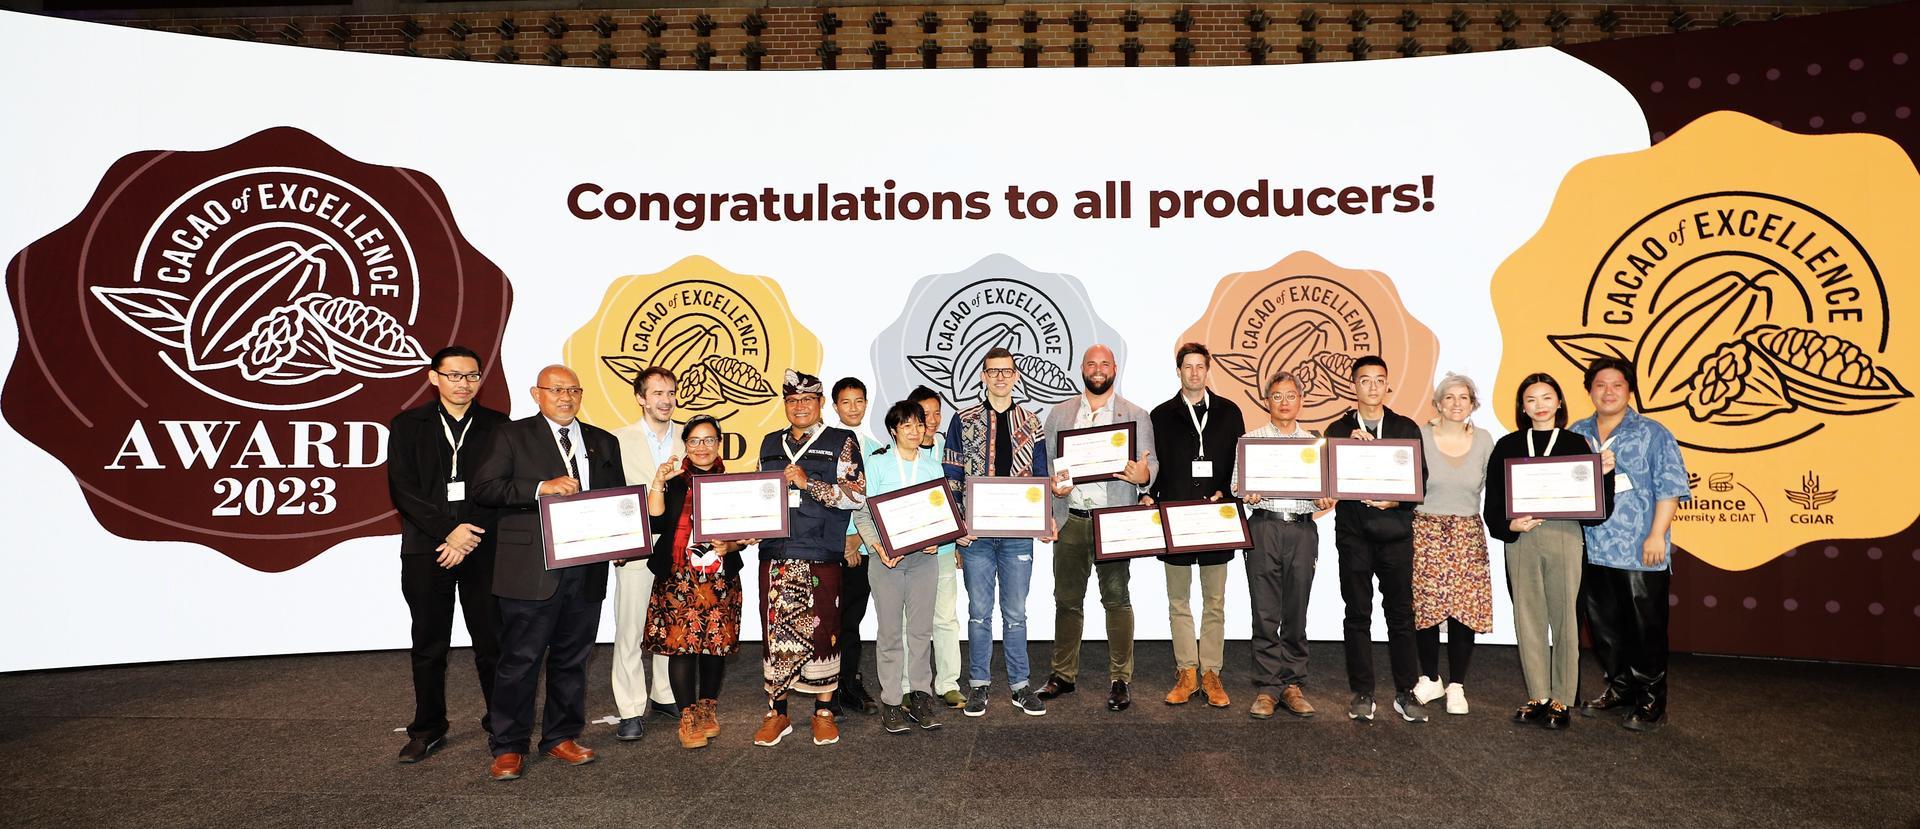 Cacao of Excellence 2023 Award Winners Revealed - Alliance Bioversity International - CIAT - Asia Winners